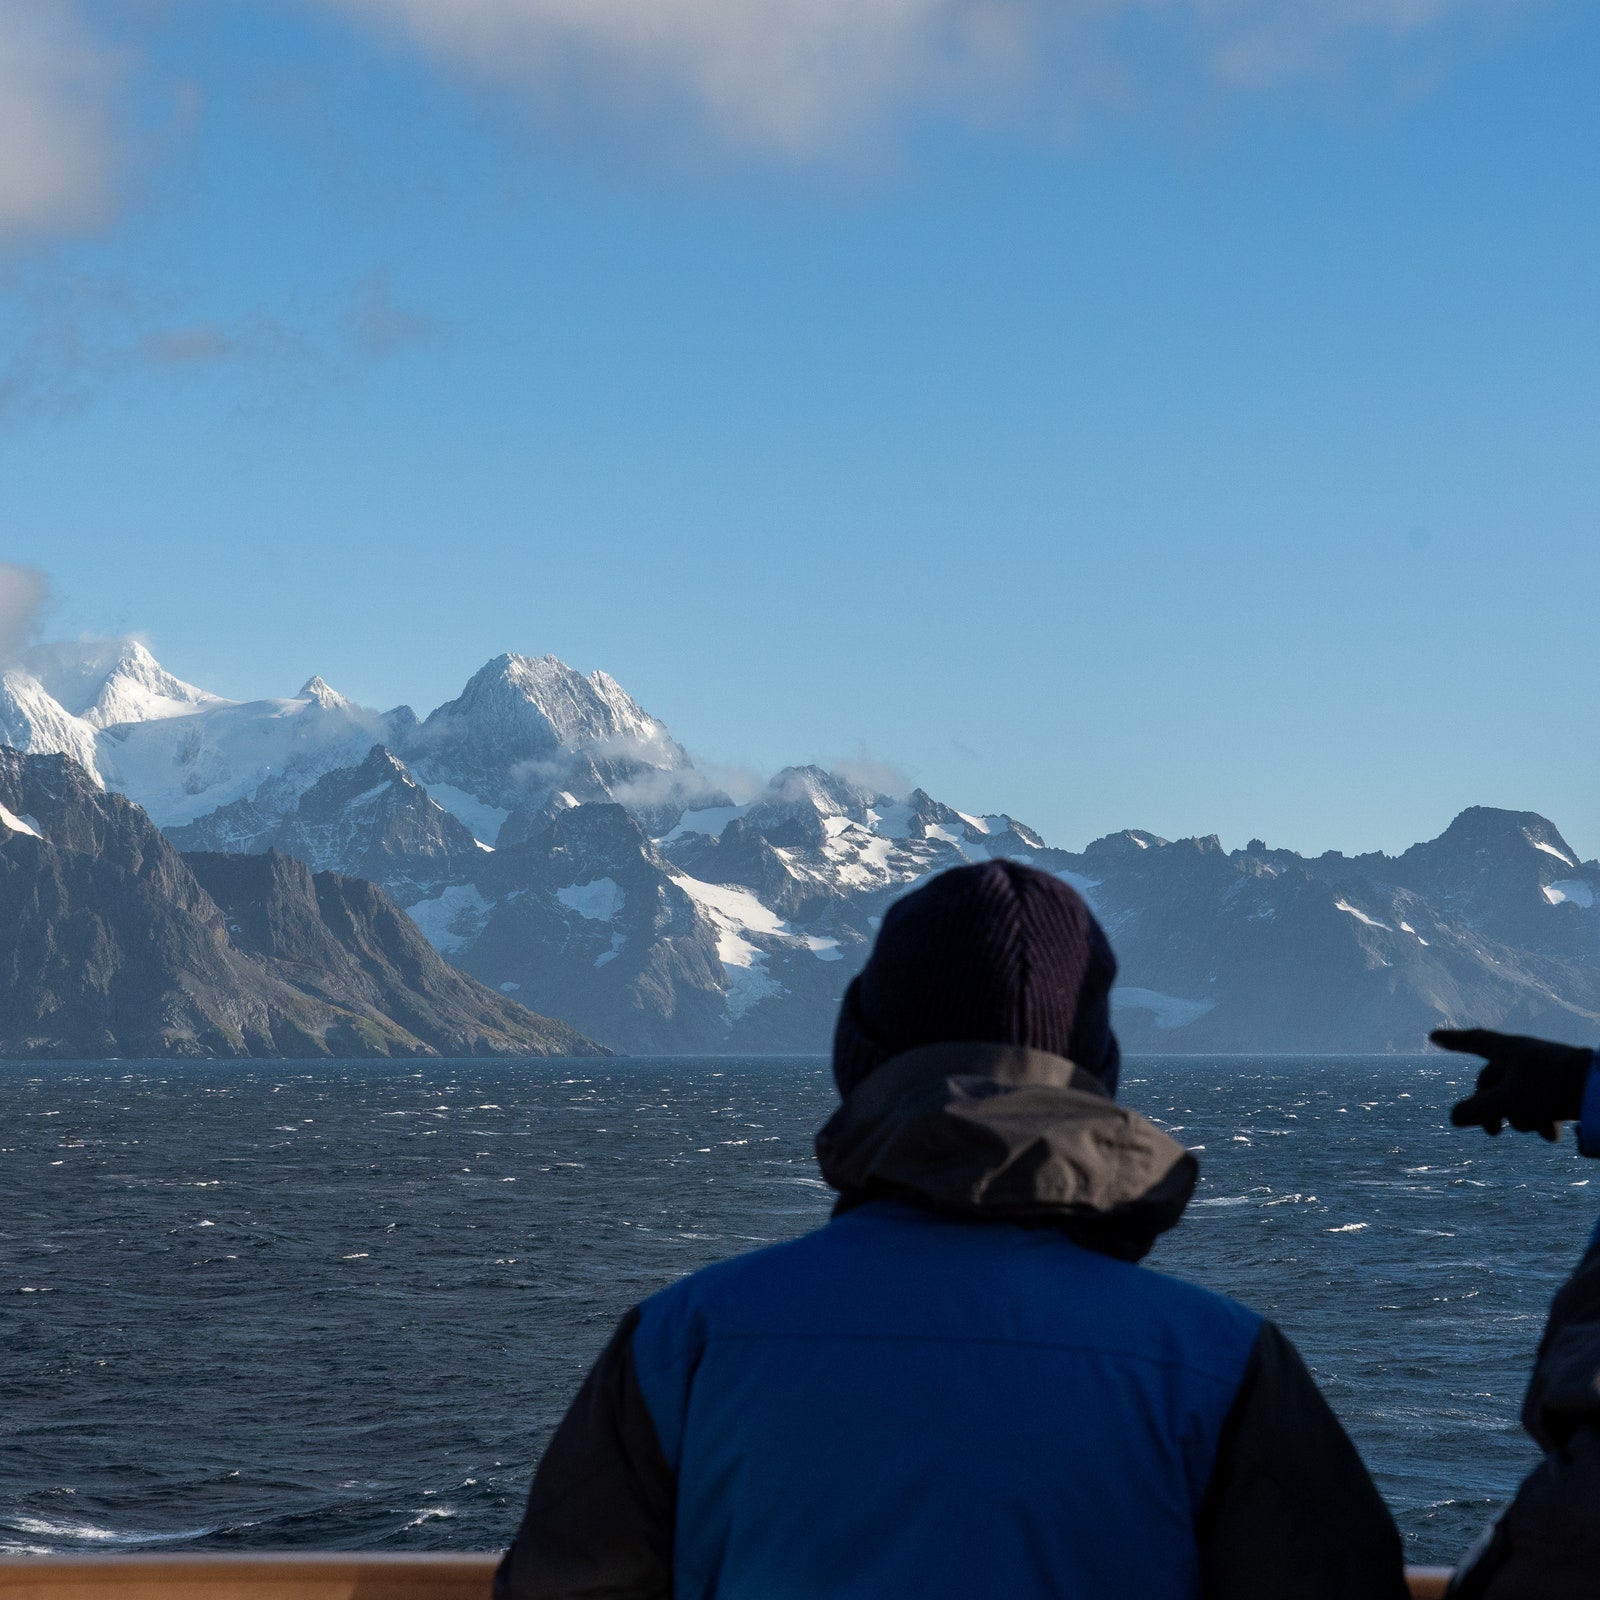 Journeying to South Georgia Island, the Wildest Place on Earth